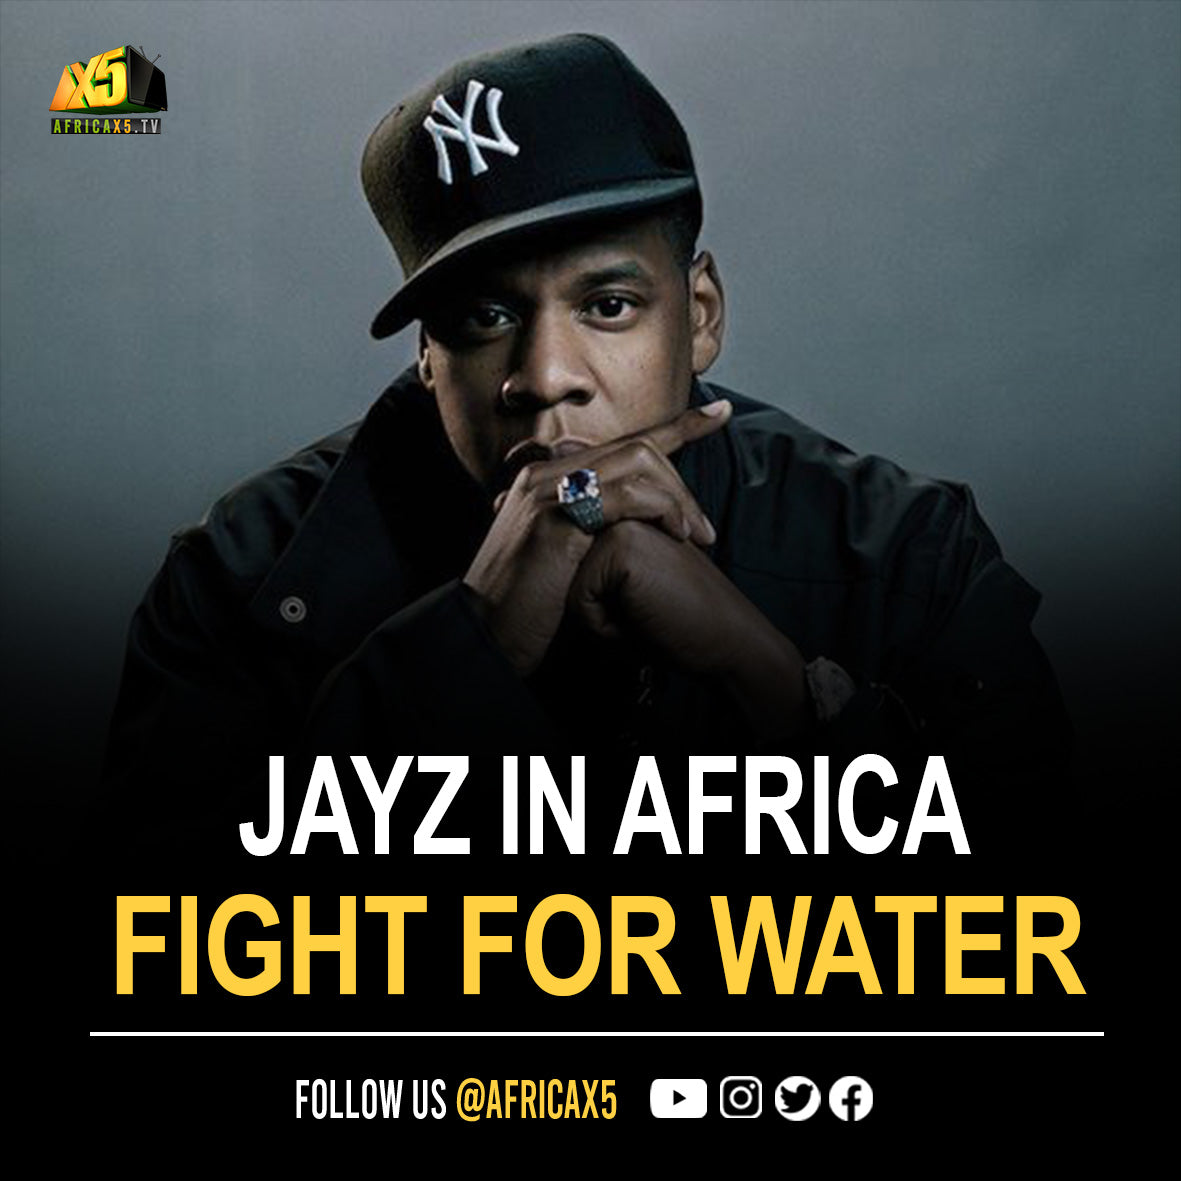 Jay-Z's Battle for Clean Water in Africa